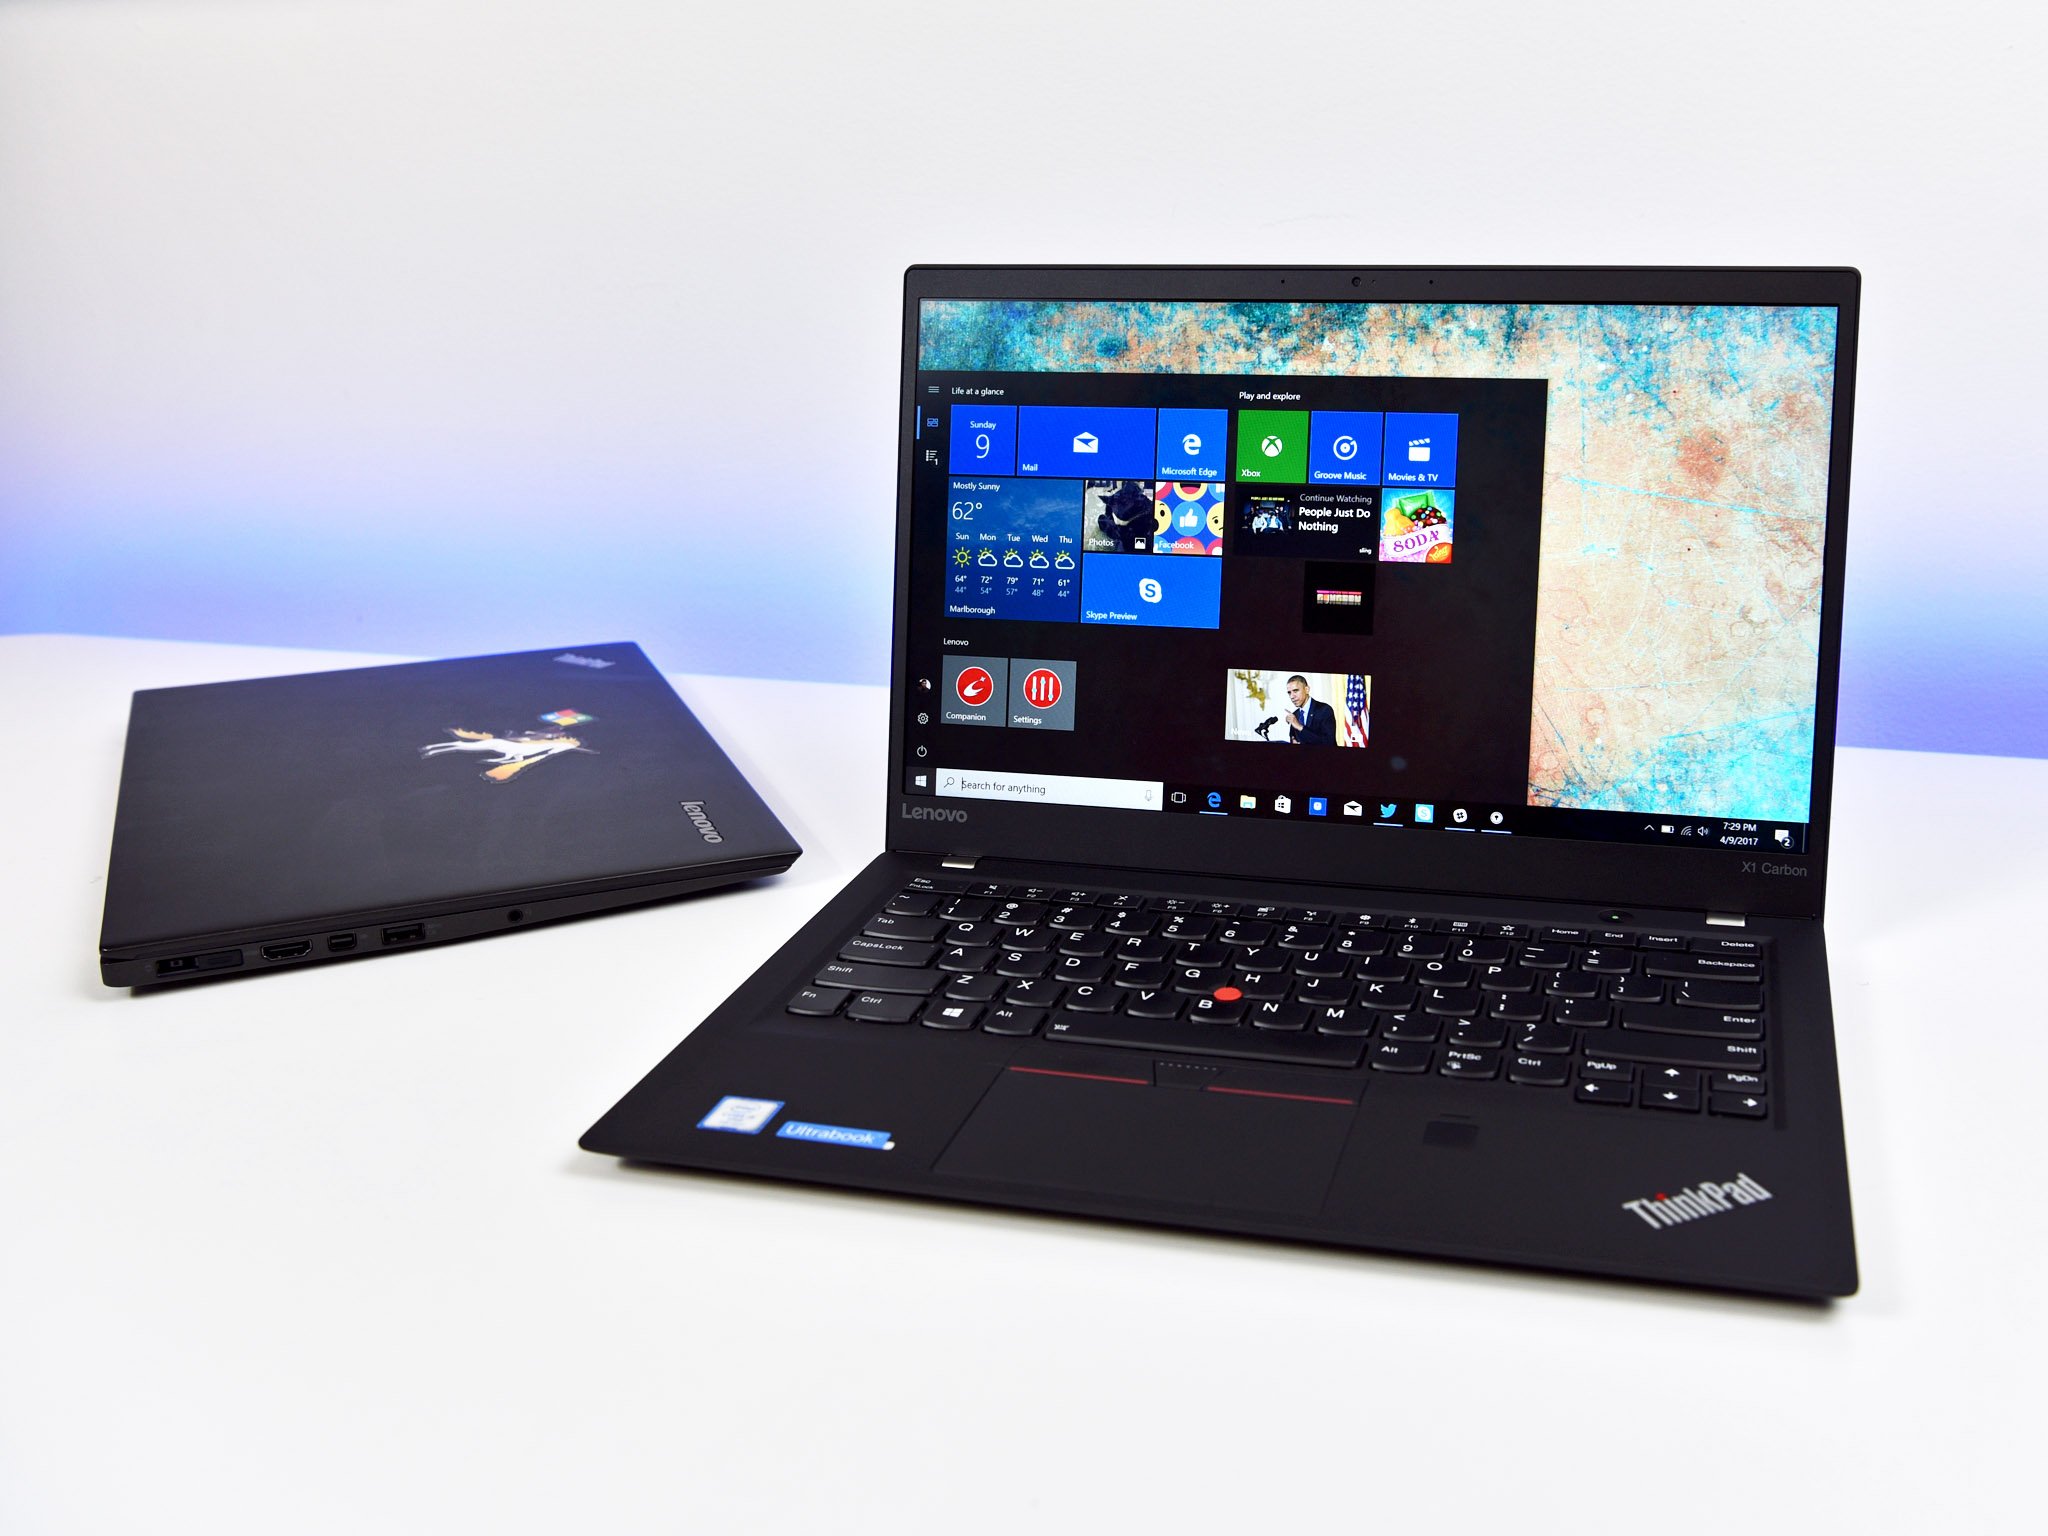 Lenovo ThinkPad X1 Carbon (2017) review: An iconic business laptop 